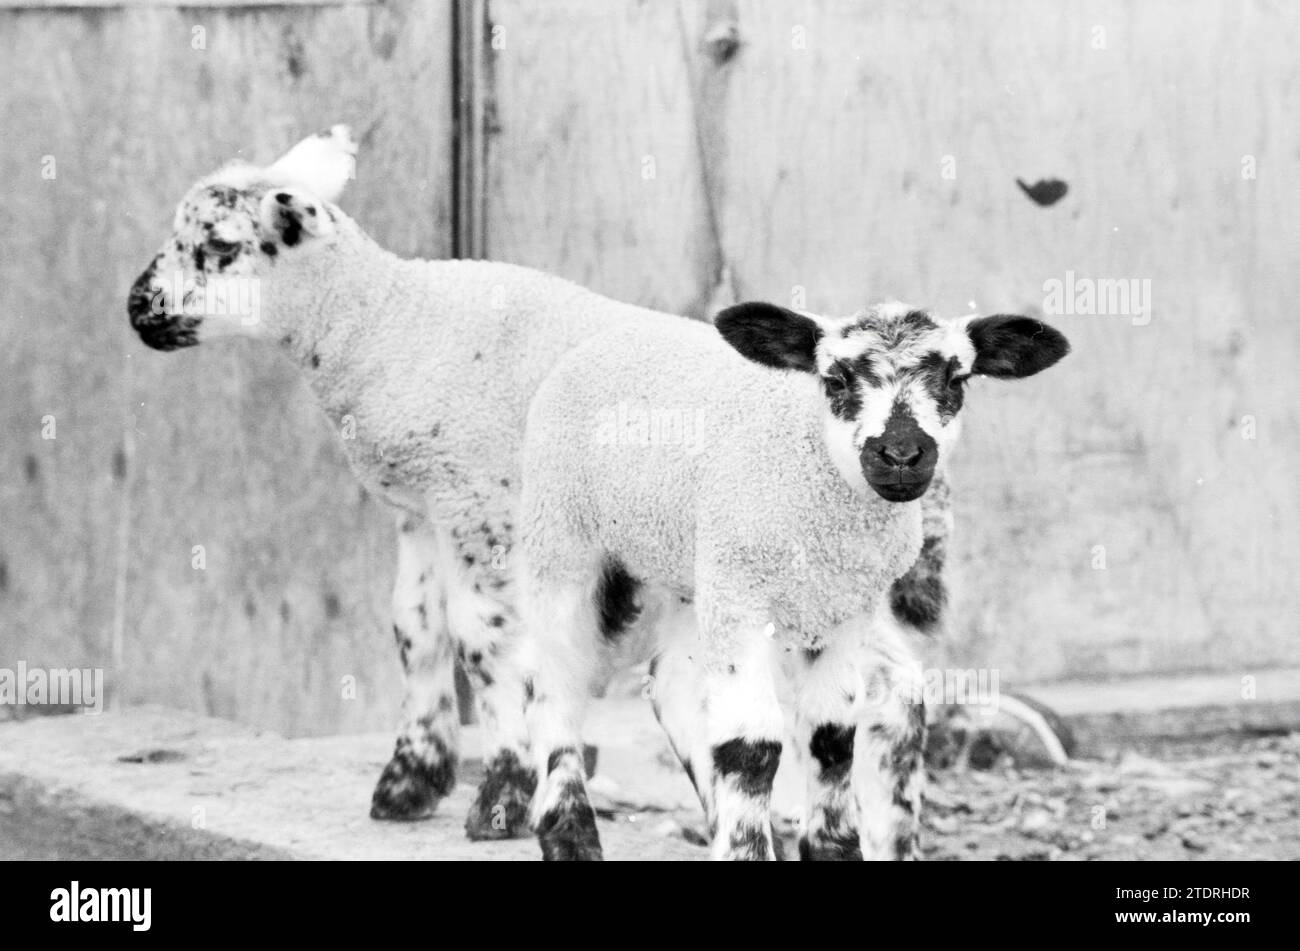 Black and white dotted lambs, Hillegommerdijk, Animals, Hillegom, Hillegommerdijk, 04-05-1987, Whizgle News from the Past, Tailored for the Future. Explore historical narratives, Dutch The Netherlands agency image with a modern perspective, bridging the gap between yesterday's events and tomorrow's insights. A timeless journey shaping the stories that shape our future Stock Photo